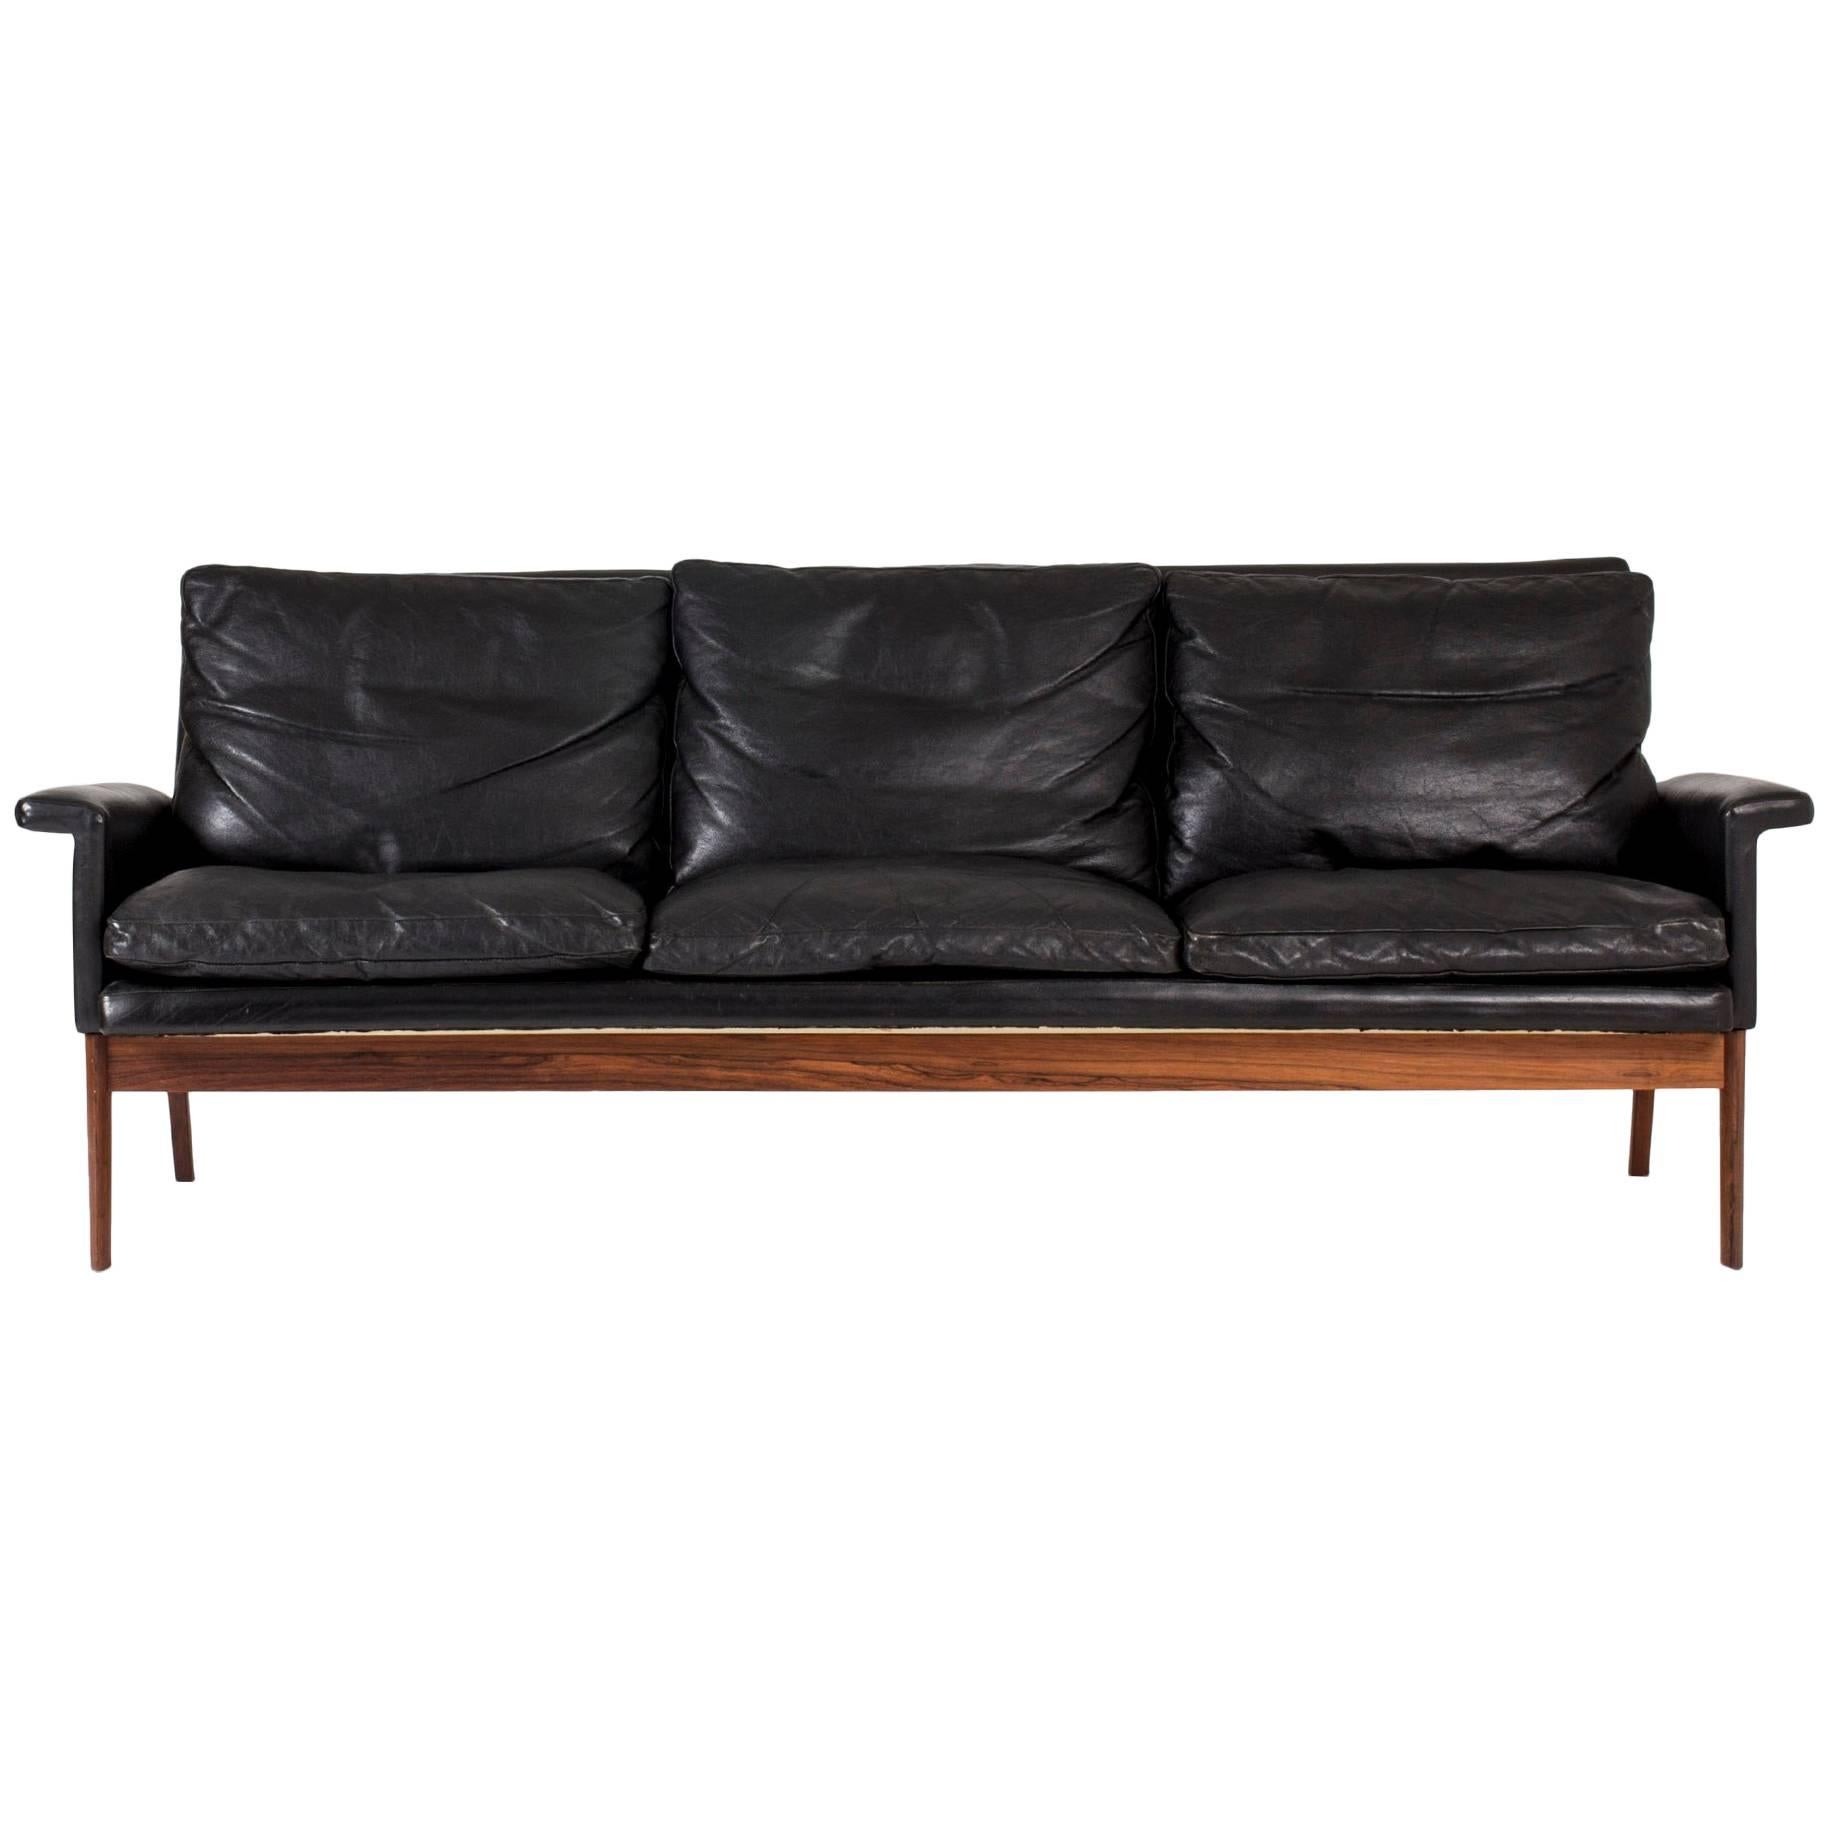 Leather and Rosewood "Jupiter" Sofa by Finn Juhl